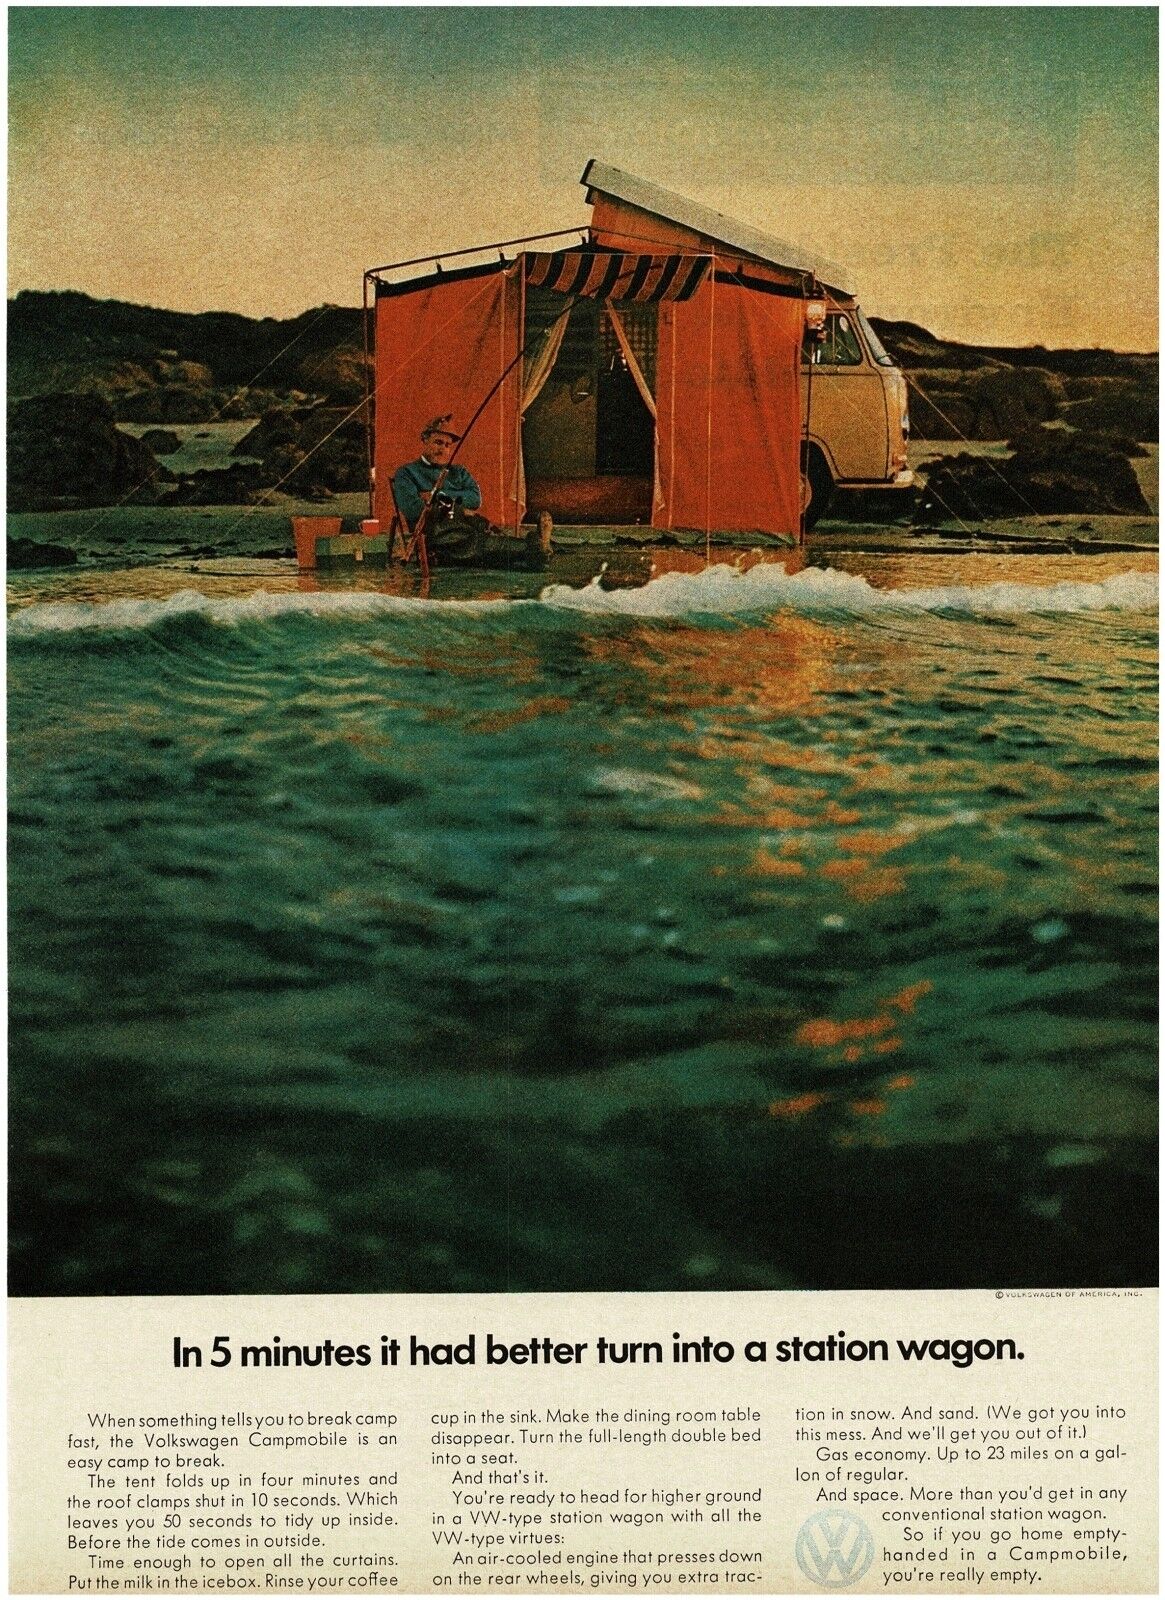 1970 Vw Volkswagen Yellow Campmobile Camping Out At The Shore Beach Vintage Ad